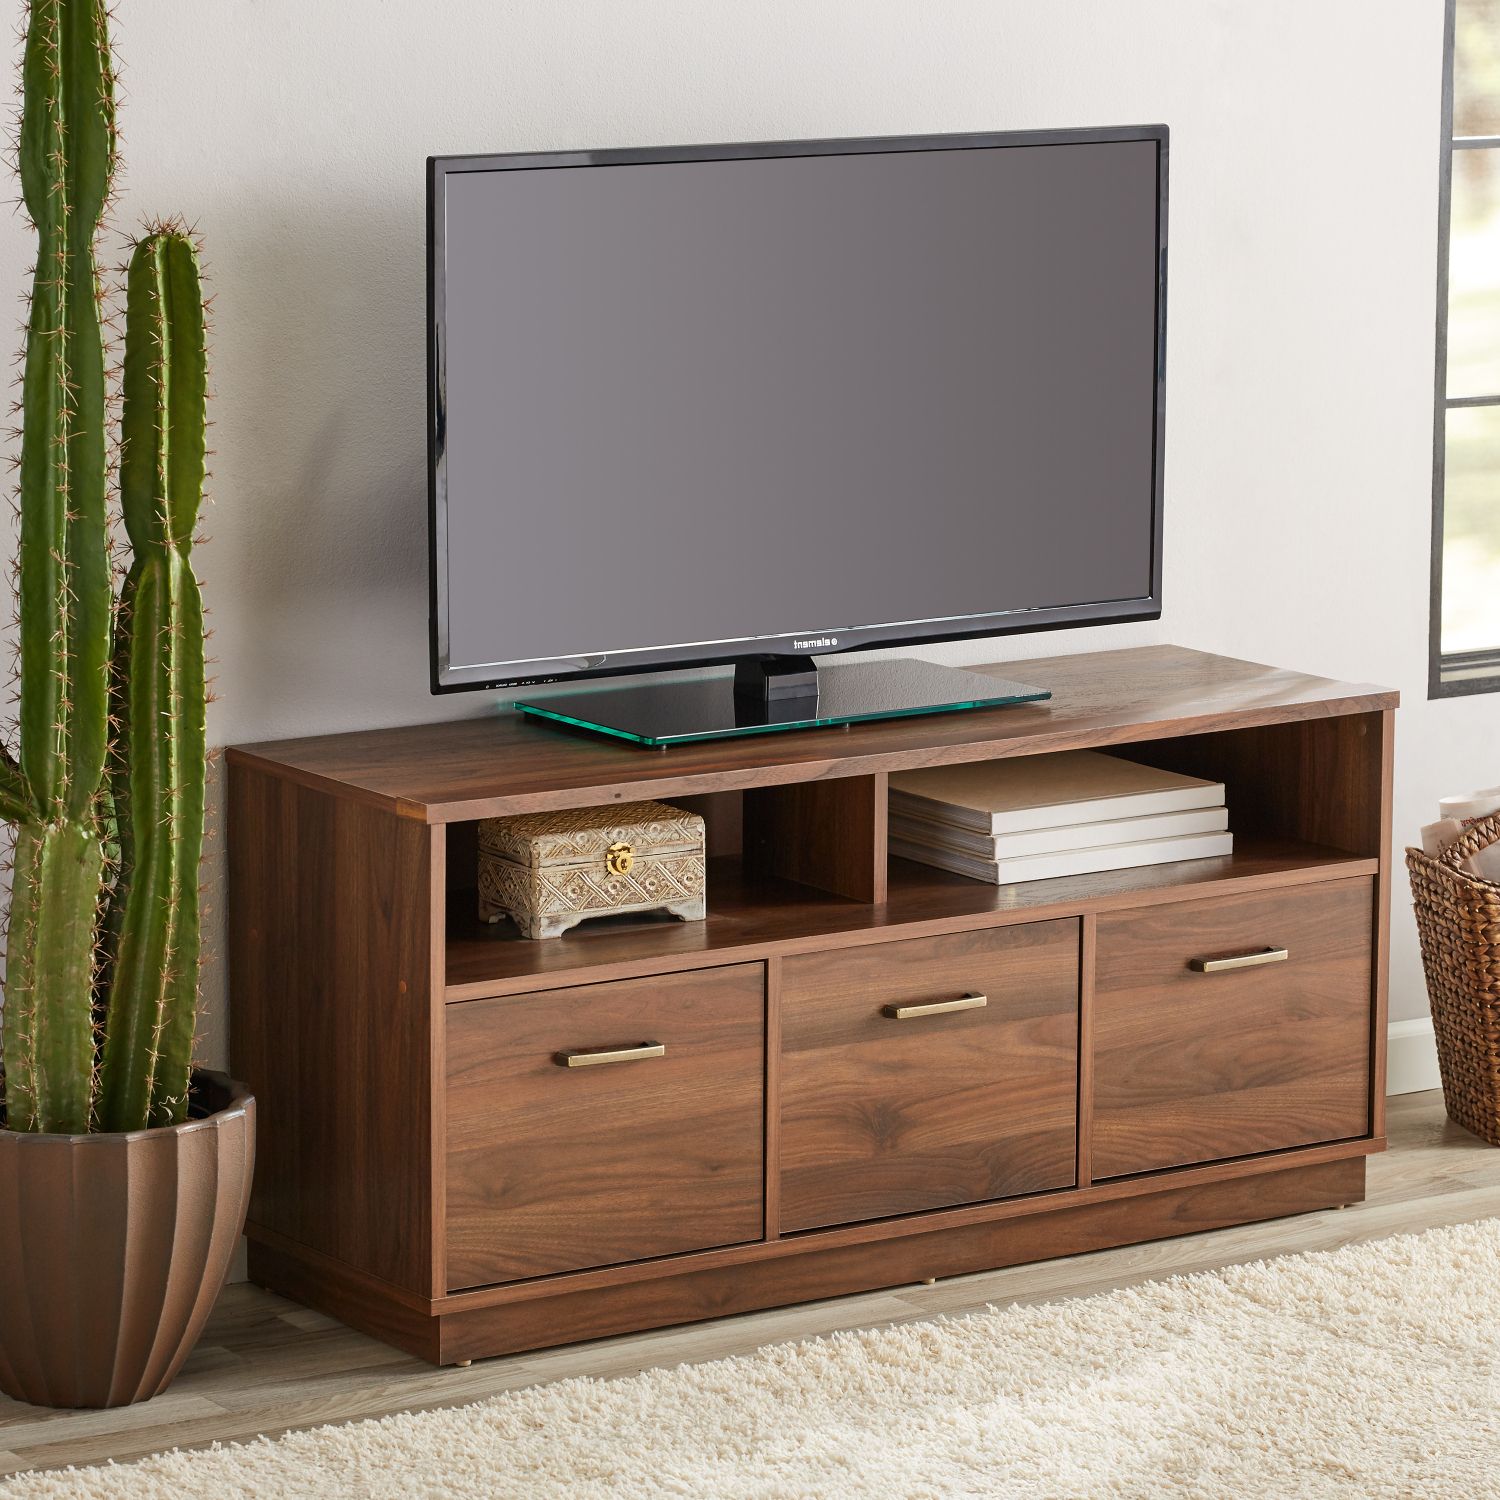 Canyon Walnut 3 Door Tv Stand Console For Tvs Up To 50 In Most Recent Colleen Tv Stands For Tvs Up To 50" (View 1 of 25)